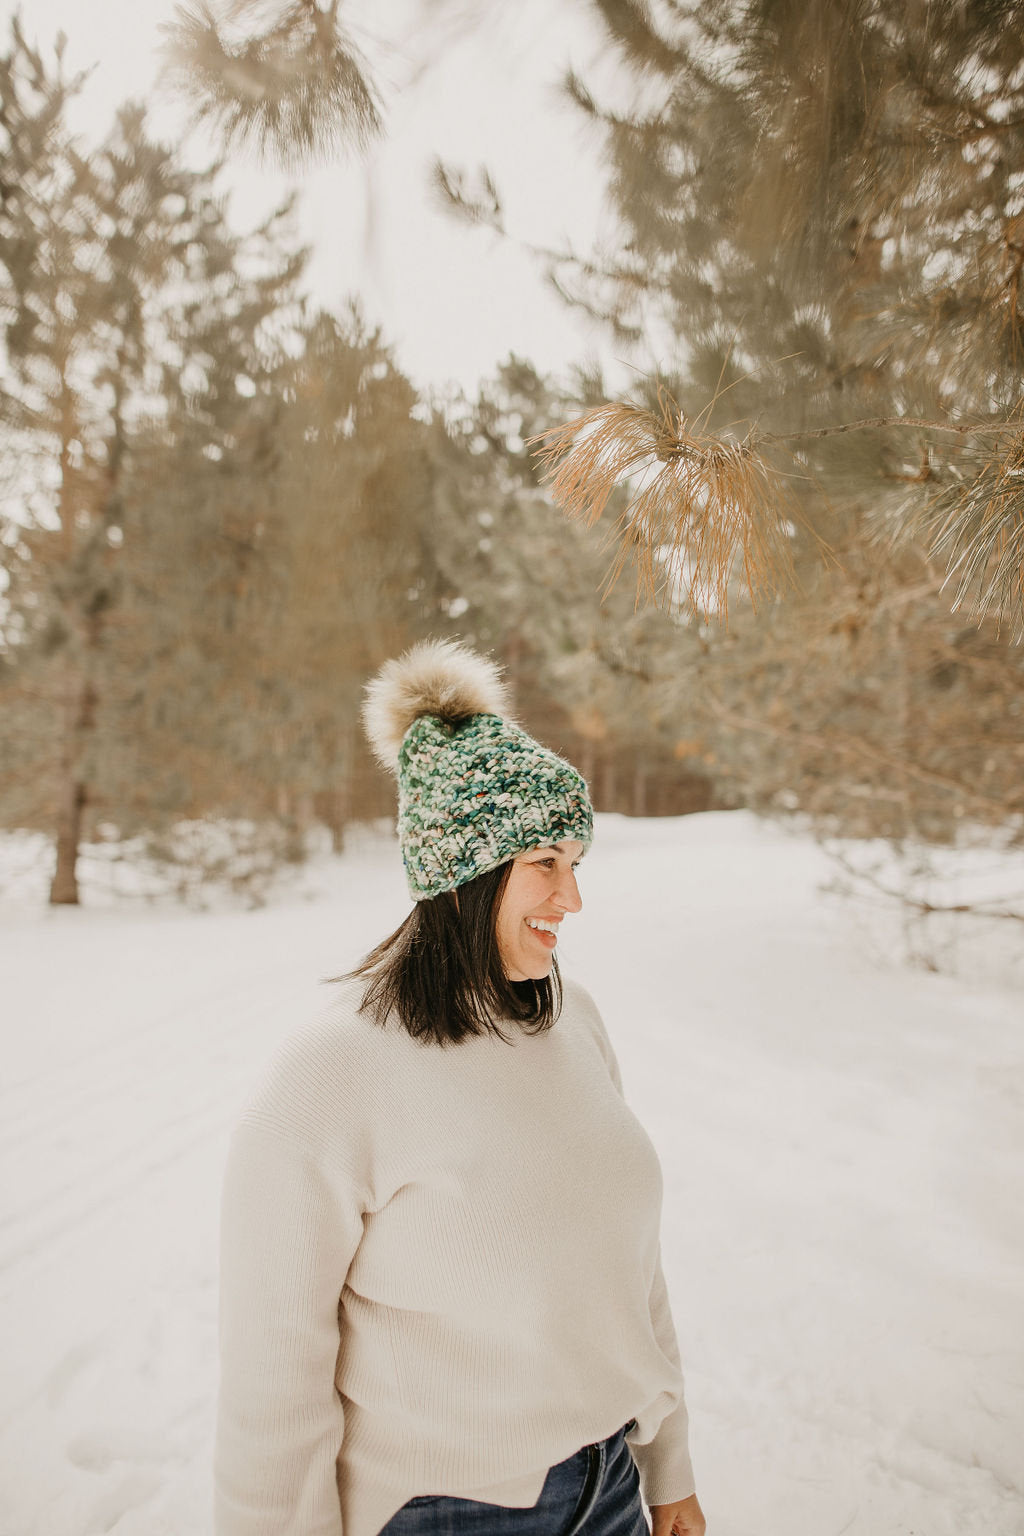 Forest Green Speckle Merino Wool Knit Hat with Faux Fur Pom Pom